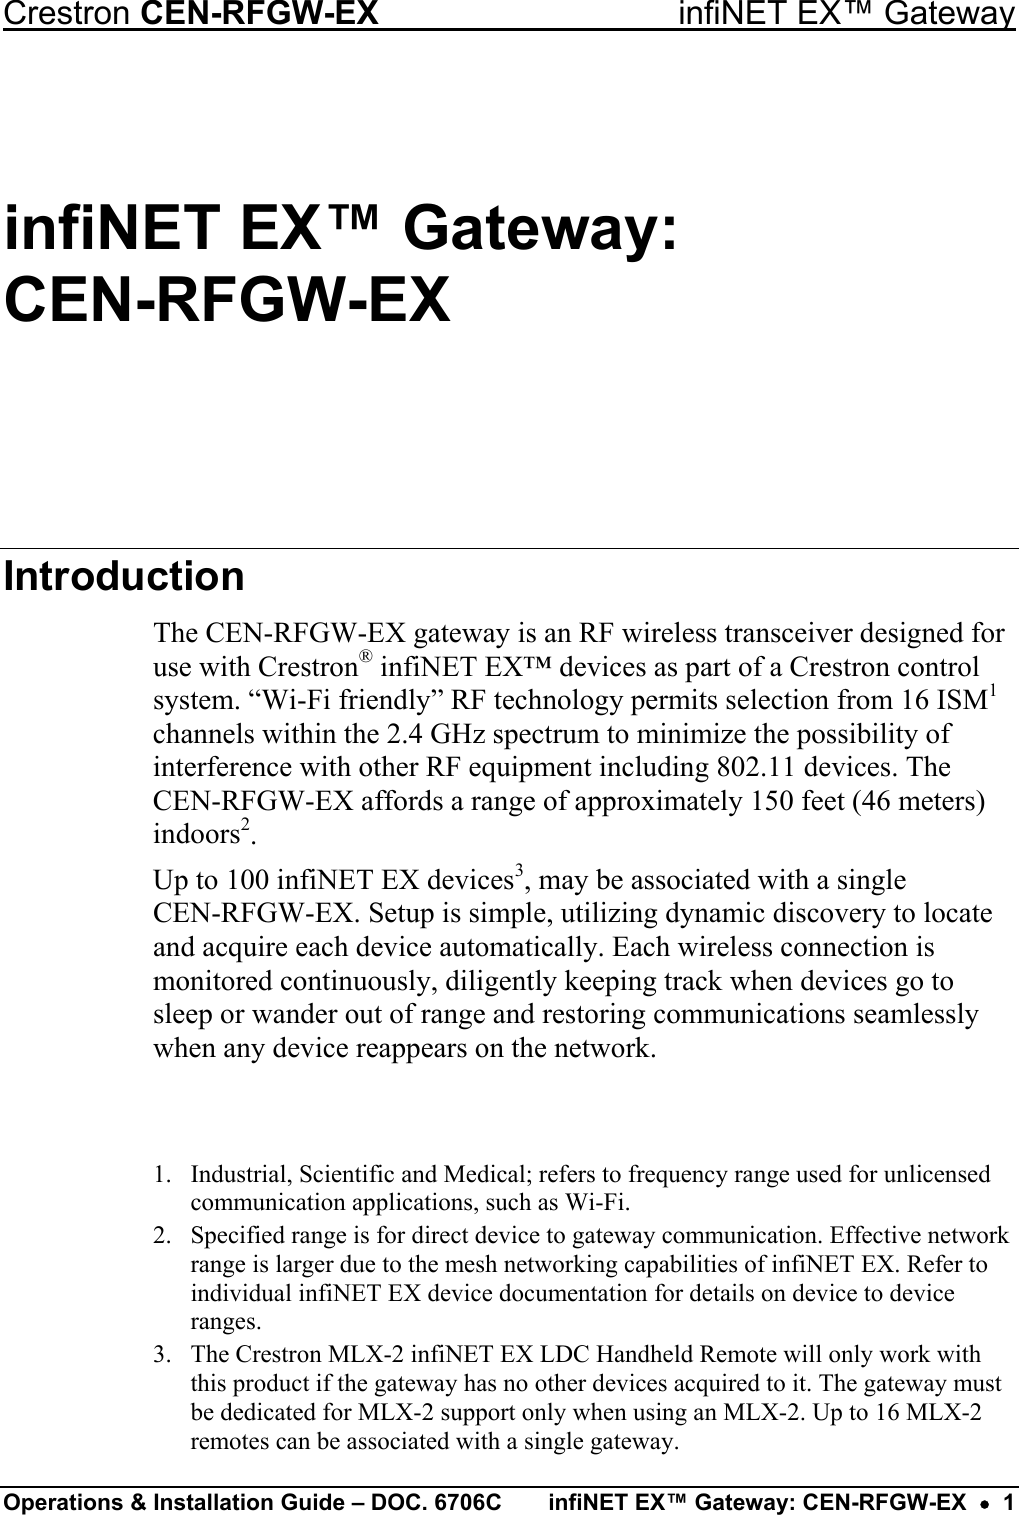 Crestron CEN-RFGW-EX  infiNET EX™ Gateway infiNET EX™ Gateway:  CEN-RFGW-EX Introduction The CEN-RFGW-EX gateway is an RF wireless transceiver designed for use with Crestron® infiNET EX™ devices as part of a Crestron control system. “Wi-Fi friendly” RF technology permits selection from 16 ISM1 channels within the 2.4 GHz spectrum to minimize the possibility of interference with other RF equipment including 802.11 devices. The CEN-RFGW-EX affords a range of approximately 150 feet (46 meters) indoors2. Up to 100 infiNET EX devices3, may be associated with a single  CEN-RFGW-EX. Setup is simple, utilizing dynamic discovery to locate and acquire each device automatically. Each wireless connection is monitored continuously, diligently keeping track when devices go to sleep or wander out of range and restoring communications seamlessly when any device reappears on the network.   1.  Industrial, Scientific and Medical; refers to frequency range used for unlicensed communication applications, such as Wi-Fi. 2.  Specified range is for direct device to gateway communication. Effective network range is larger due to the mesh networking capabilities of infiNET EX. Refer to individual infiNET EX device documentation for details on device to device ranges. 3.  The Crestron MLX-2 infiNET EX LDC Handheld Remote will only work with this product if the gateway has no other devices acquired to it. The gateway must be dedicated for MLX-2 support only when using an MLX-2. Up to 16 MLX-2 remotes can be associated with a single gateway. Operations &amp; Installation Guide – DOC. 6706C  infiNET EX™ Gateway: CEN-RFGW-EX  •  1 